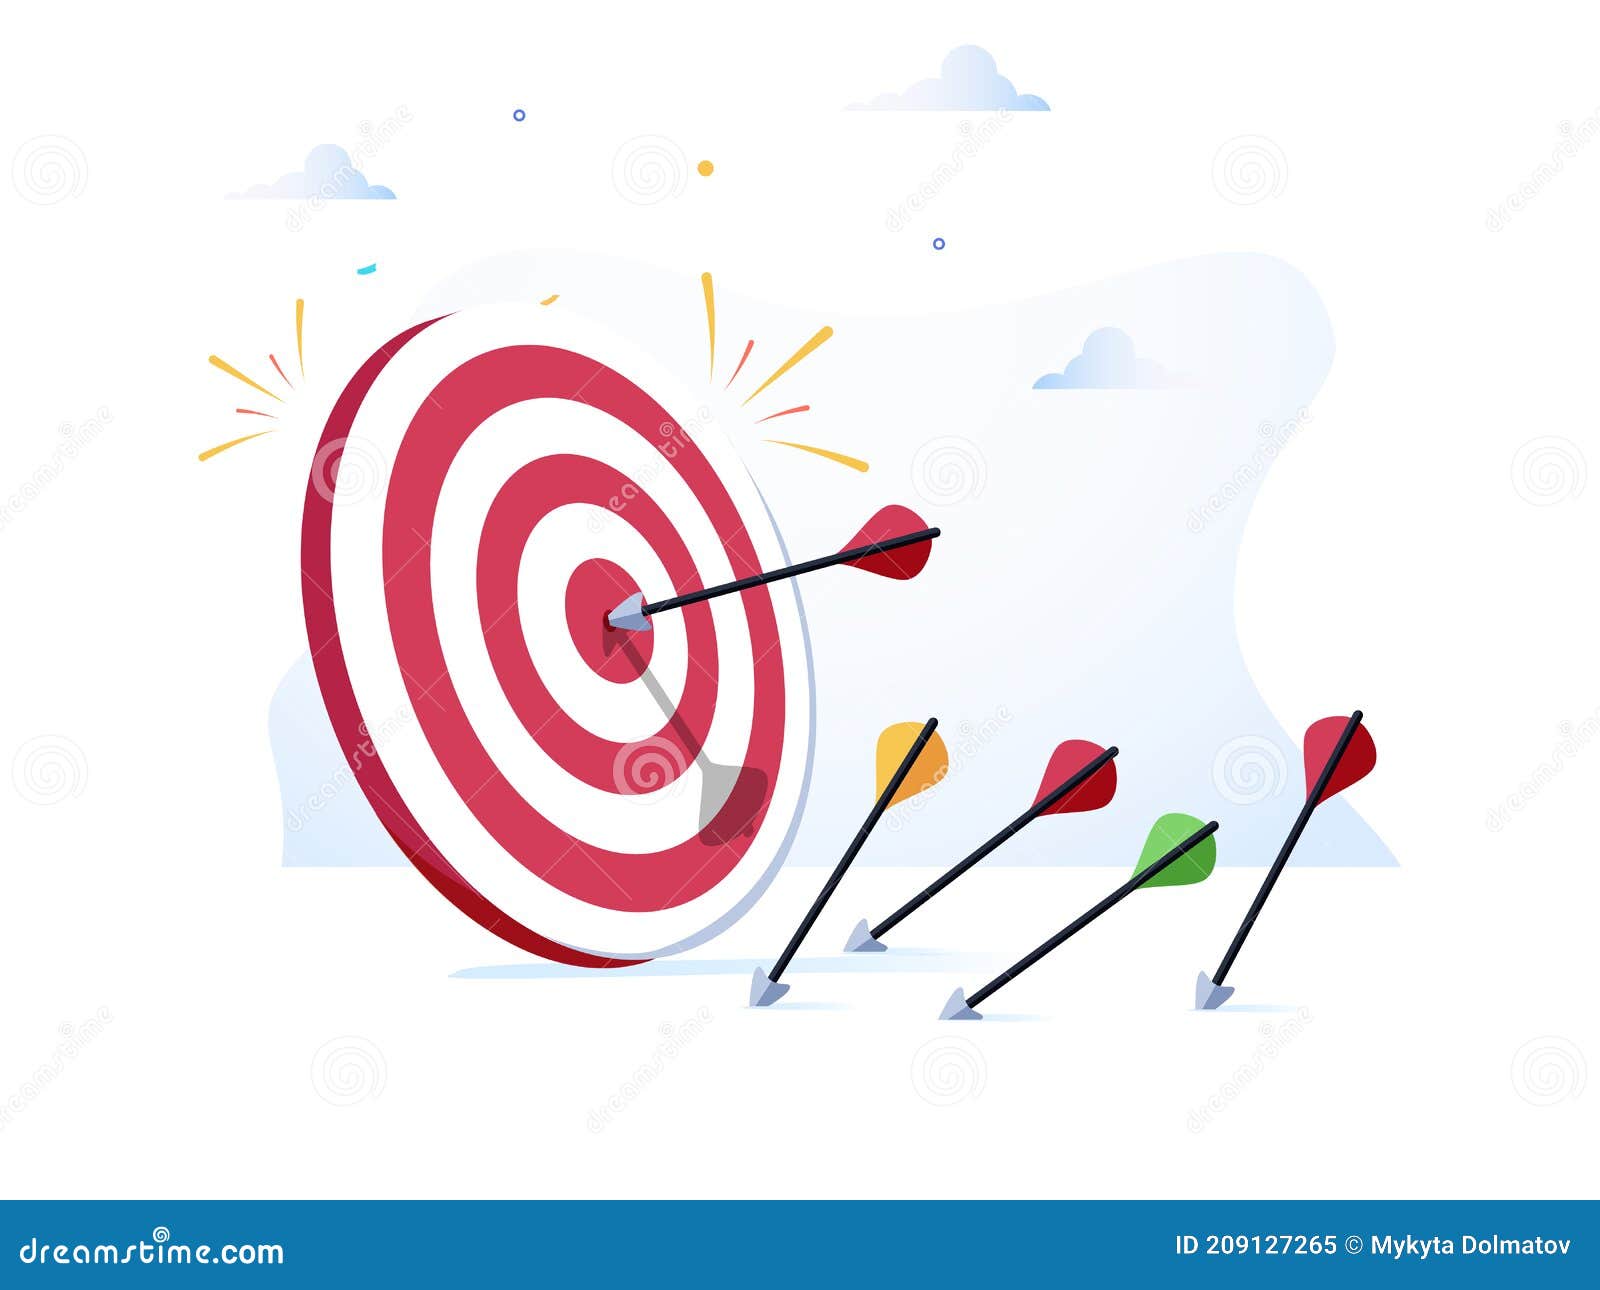 cartoon arrows missed hitting target mark  on white background. multiple fail inaccurate attempt hit archery